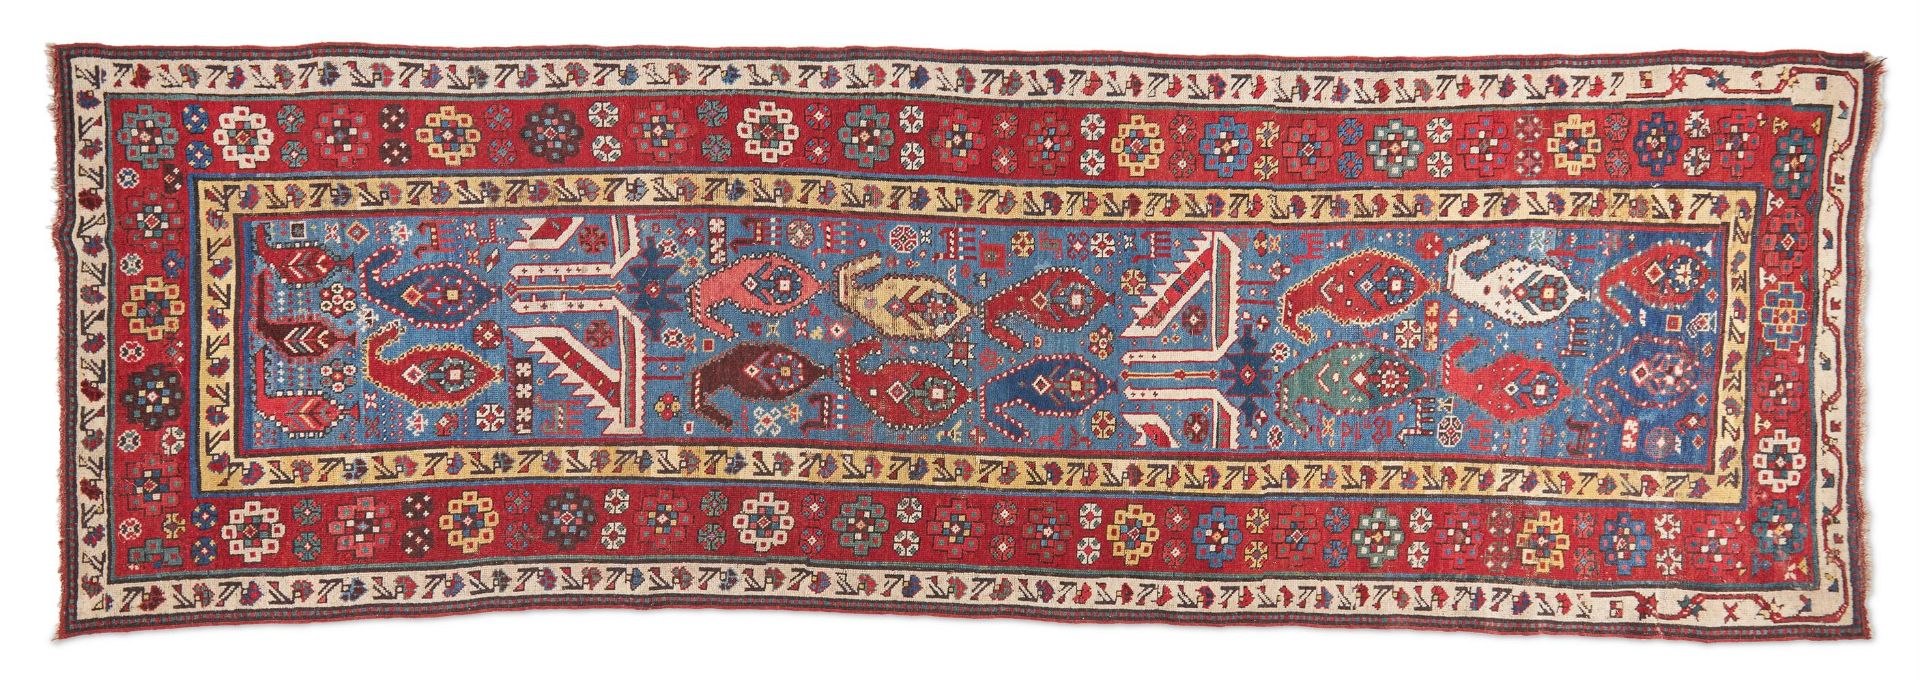 A MOGHAN RUNNER, THE CAUCASUS, LATE 19TH CENTURY